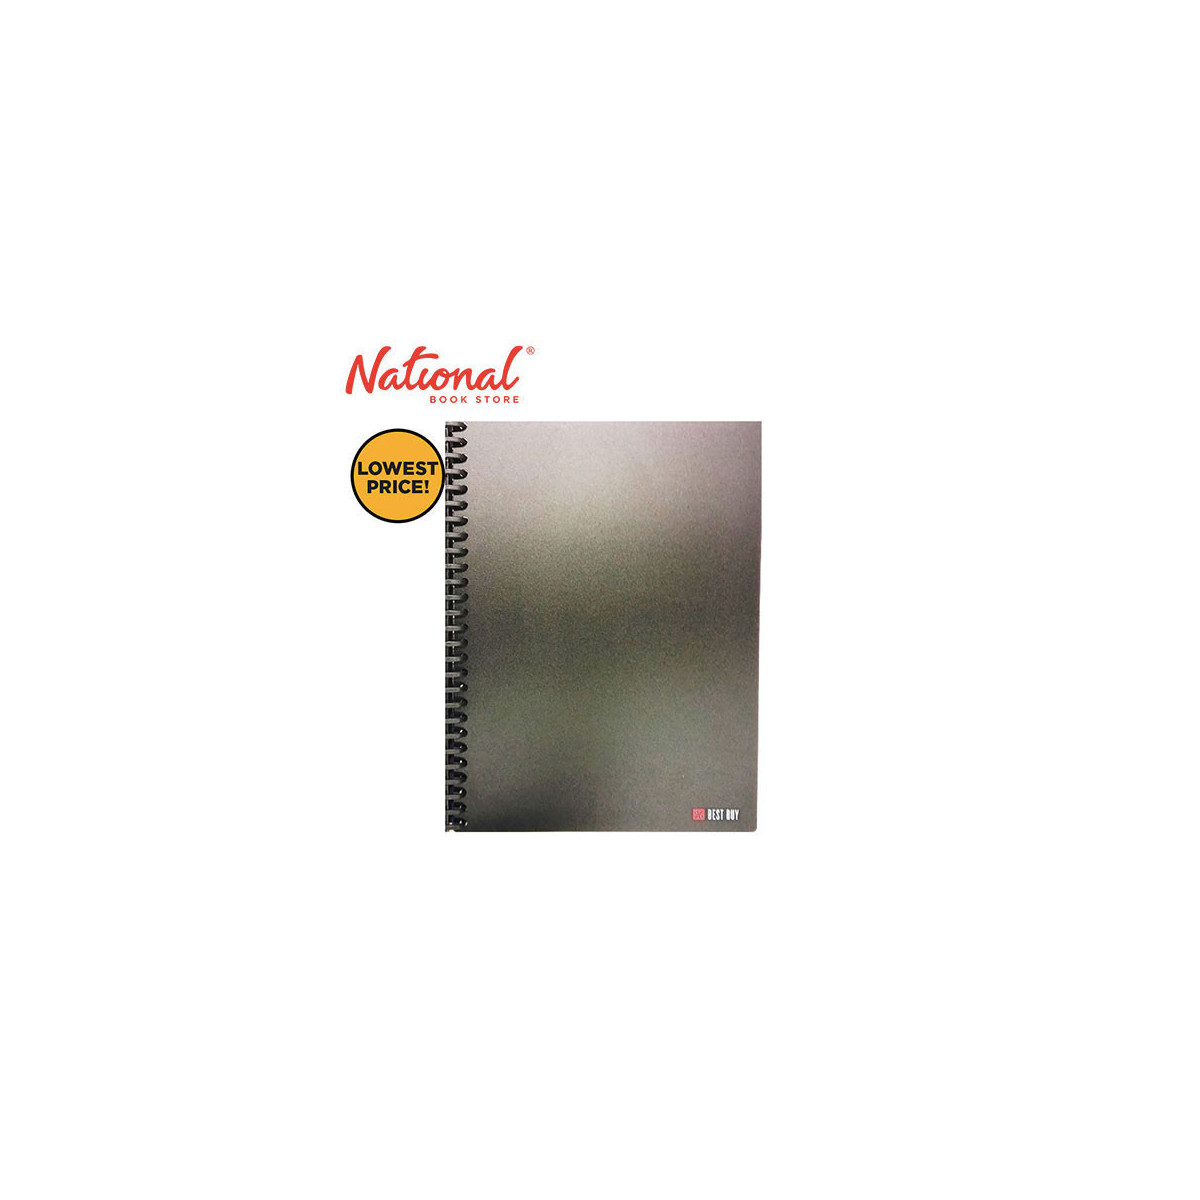 BEST BUY CLEARBOOK REFILLABLE SHORT BK 20 SHEETS 23 HOLES BLACK